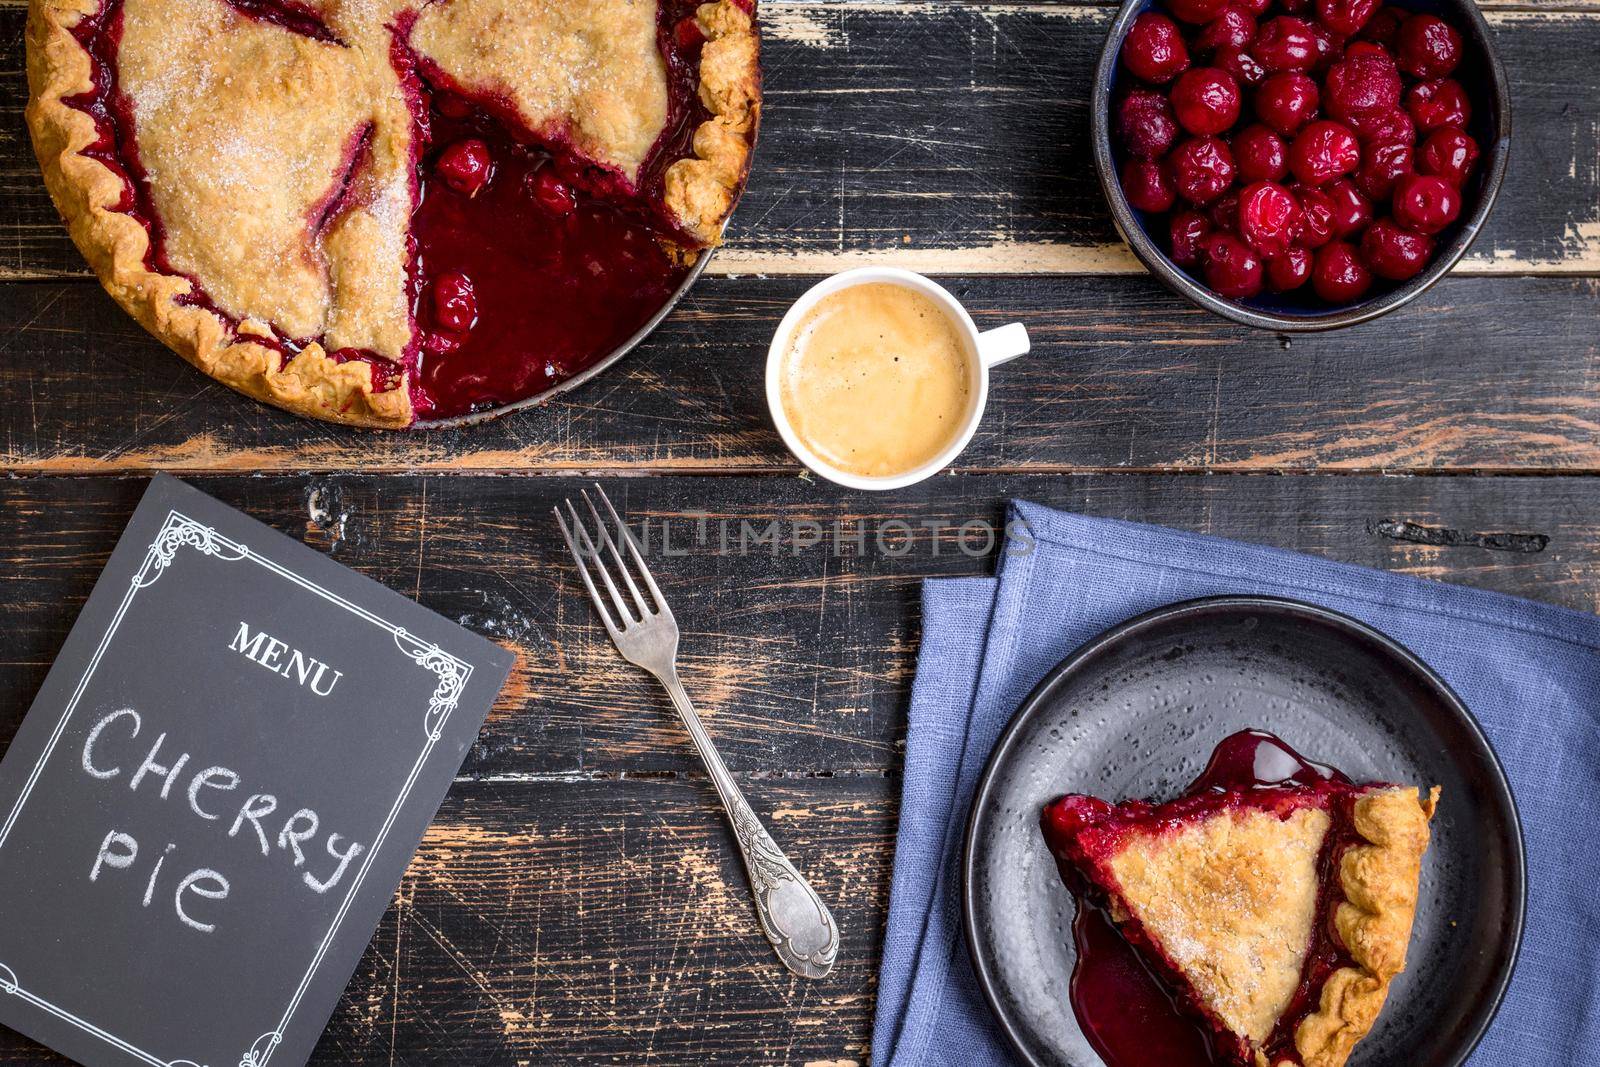 Cherry pie, cup of coffee and menu chalkboard by its_al_dente